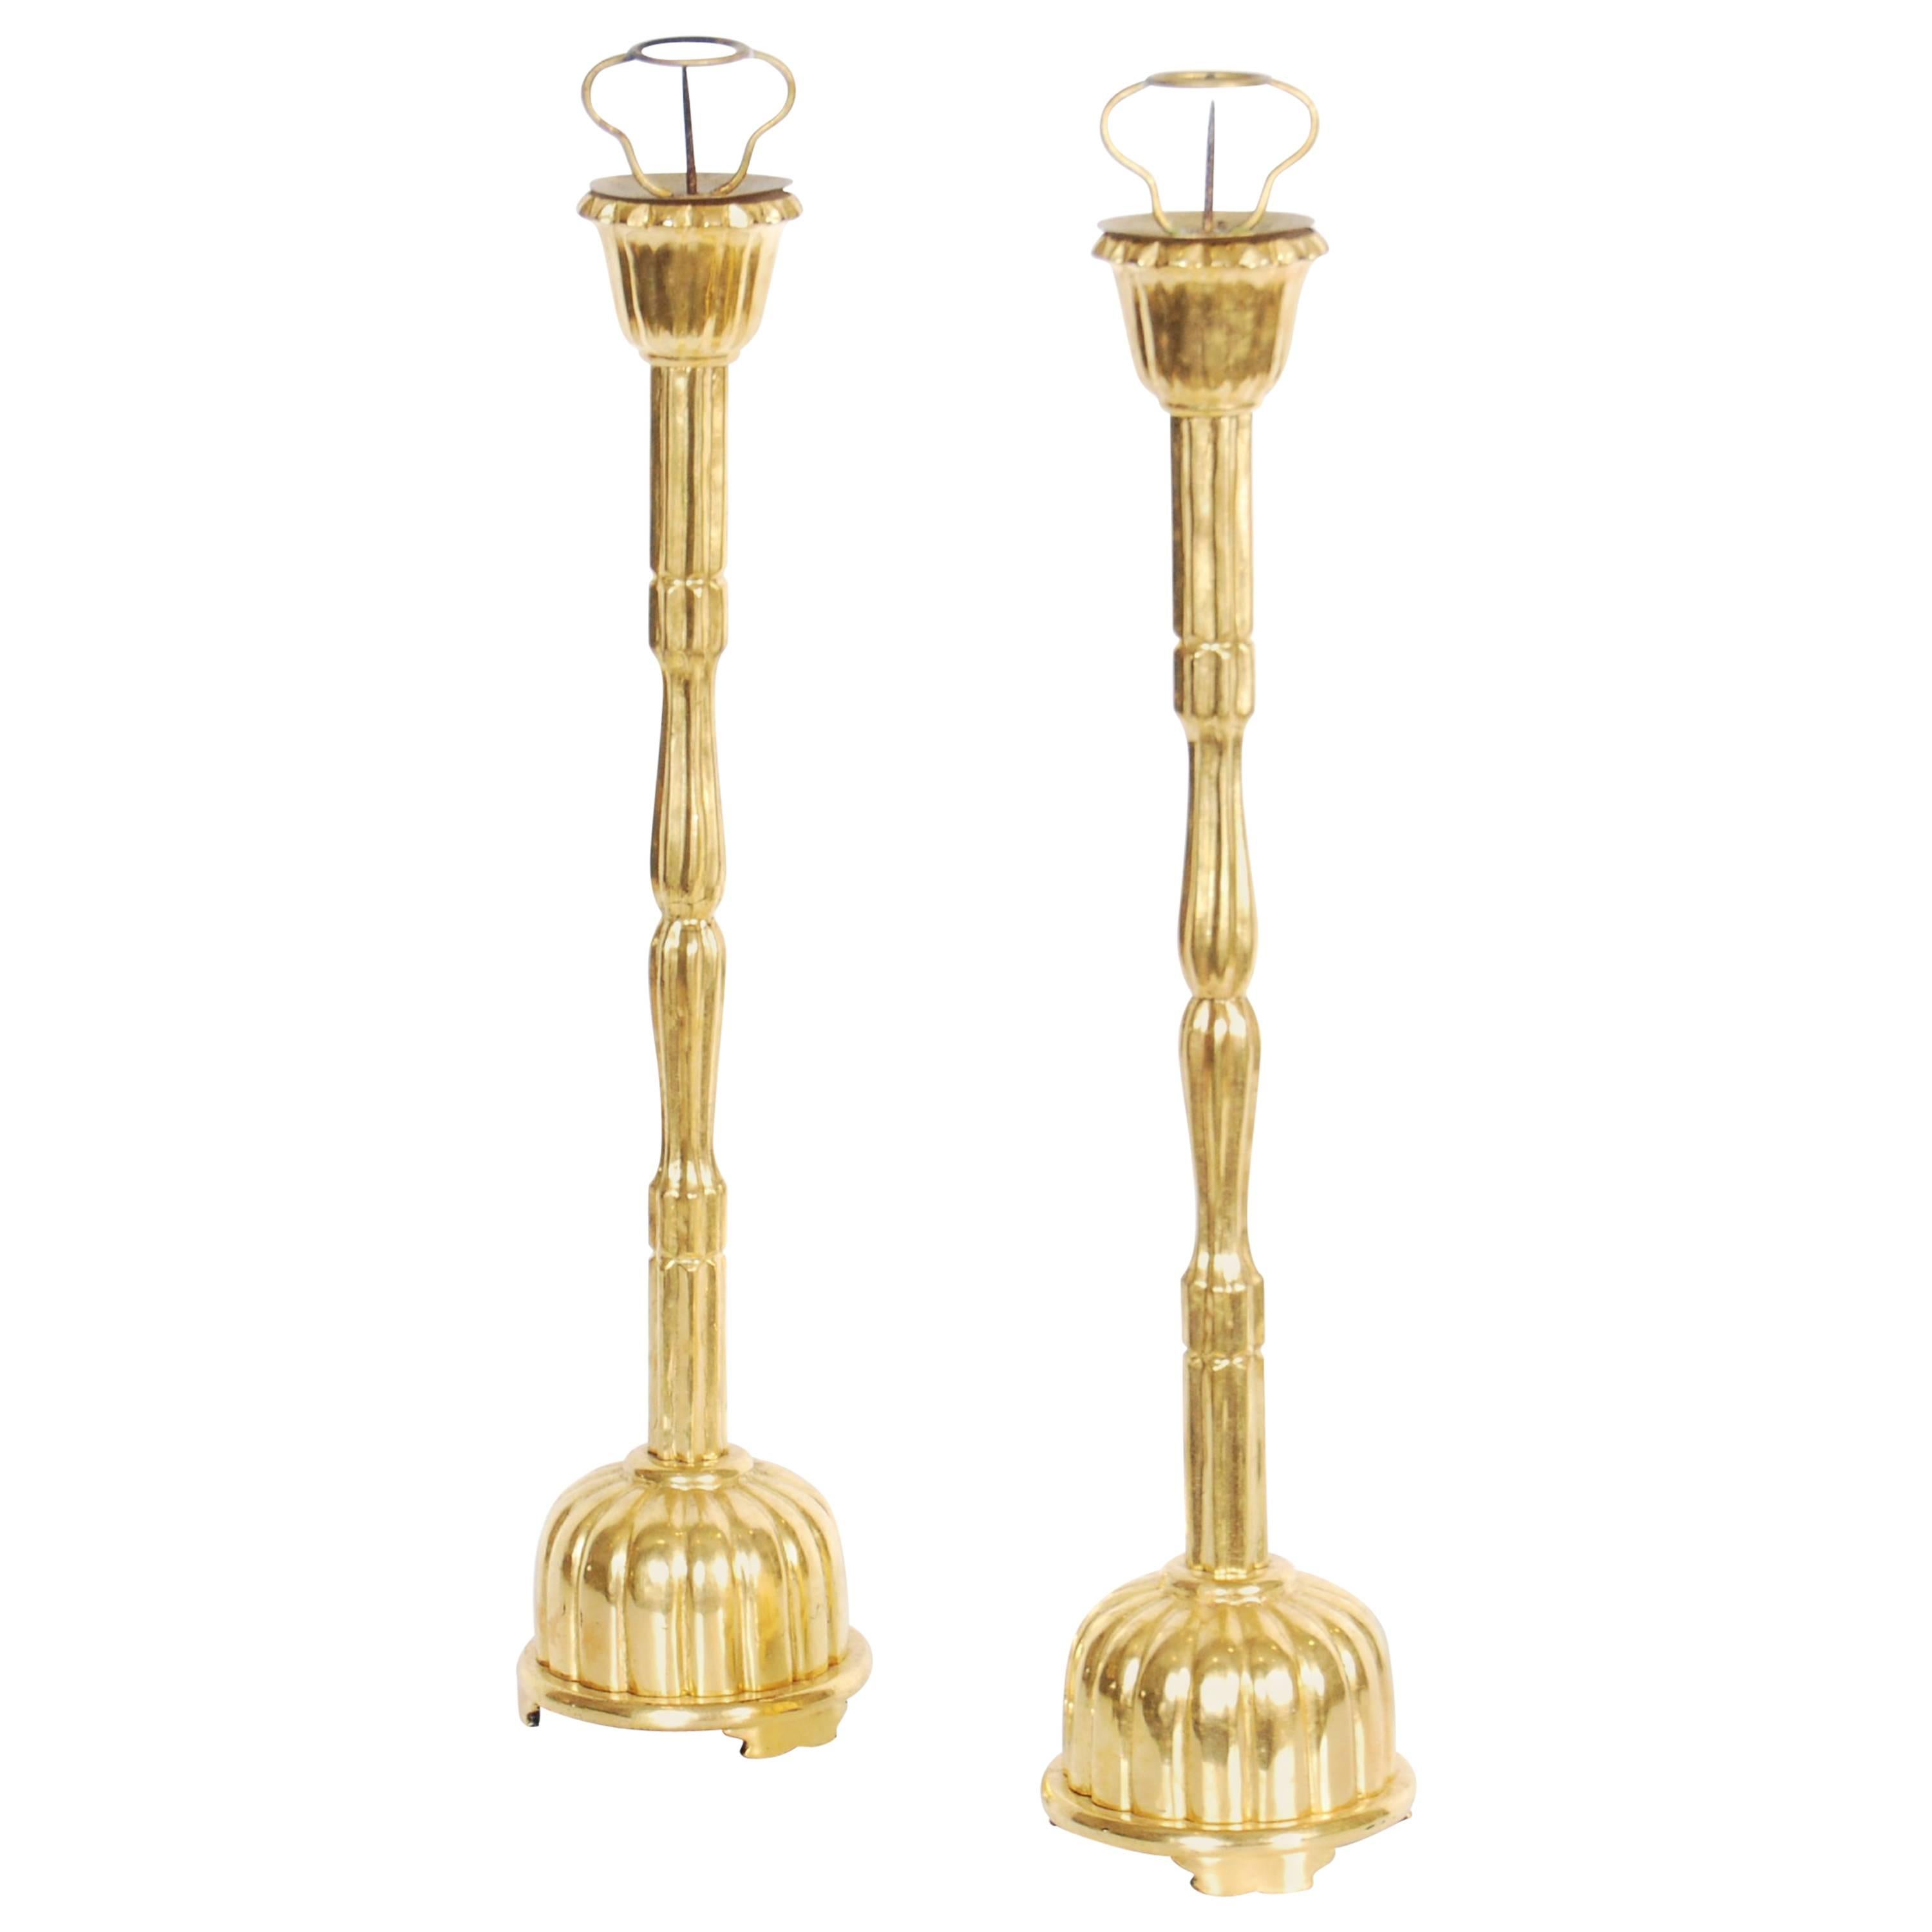 Japanese Gilt Lacquer Buddhist Candle Stands, Meiji Period, Early 20th Century